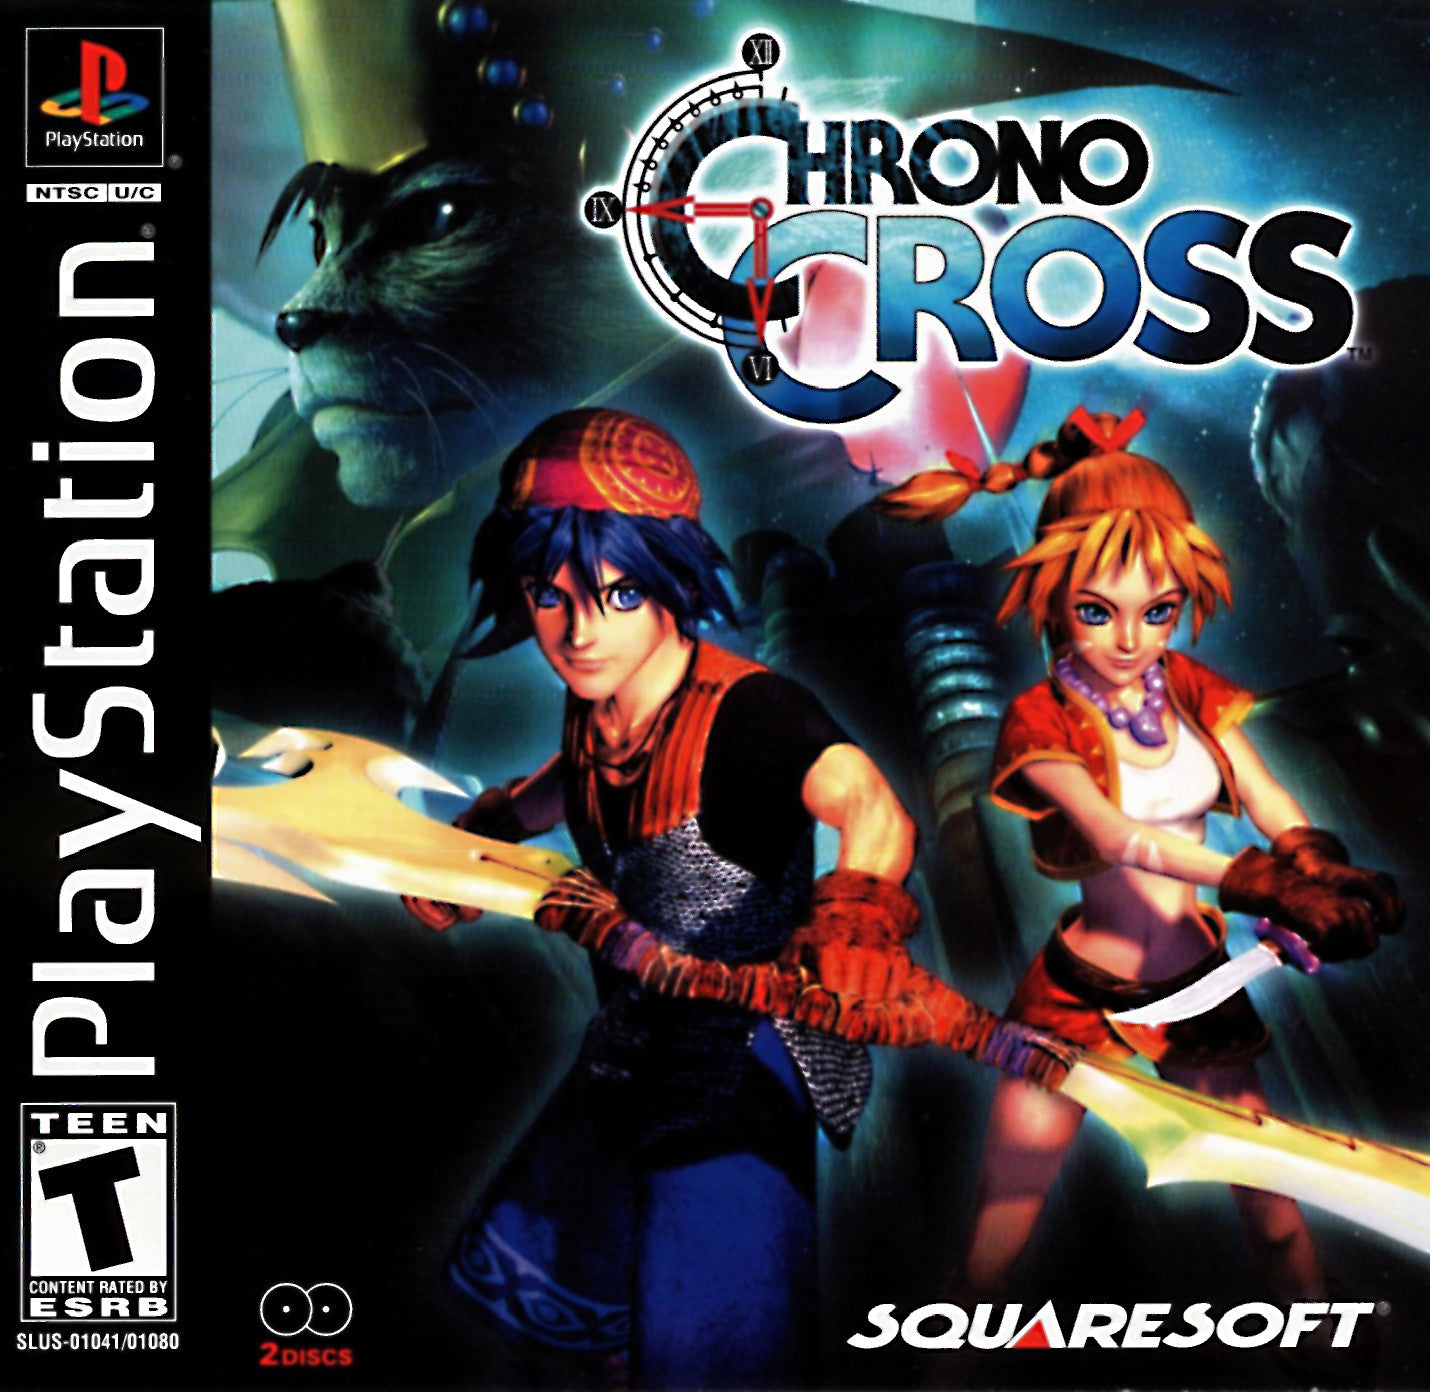 Chrono Cross - PlayStation 1 (PS1) Game - YourGamingShop.com - Buy, Sell, Trade Video Games Online. 120 Day Warranty. Satisfaction Guaranteed.